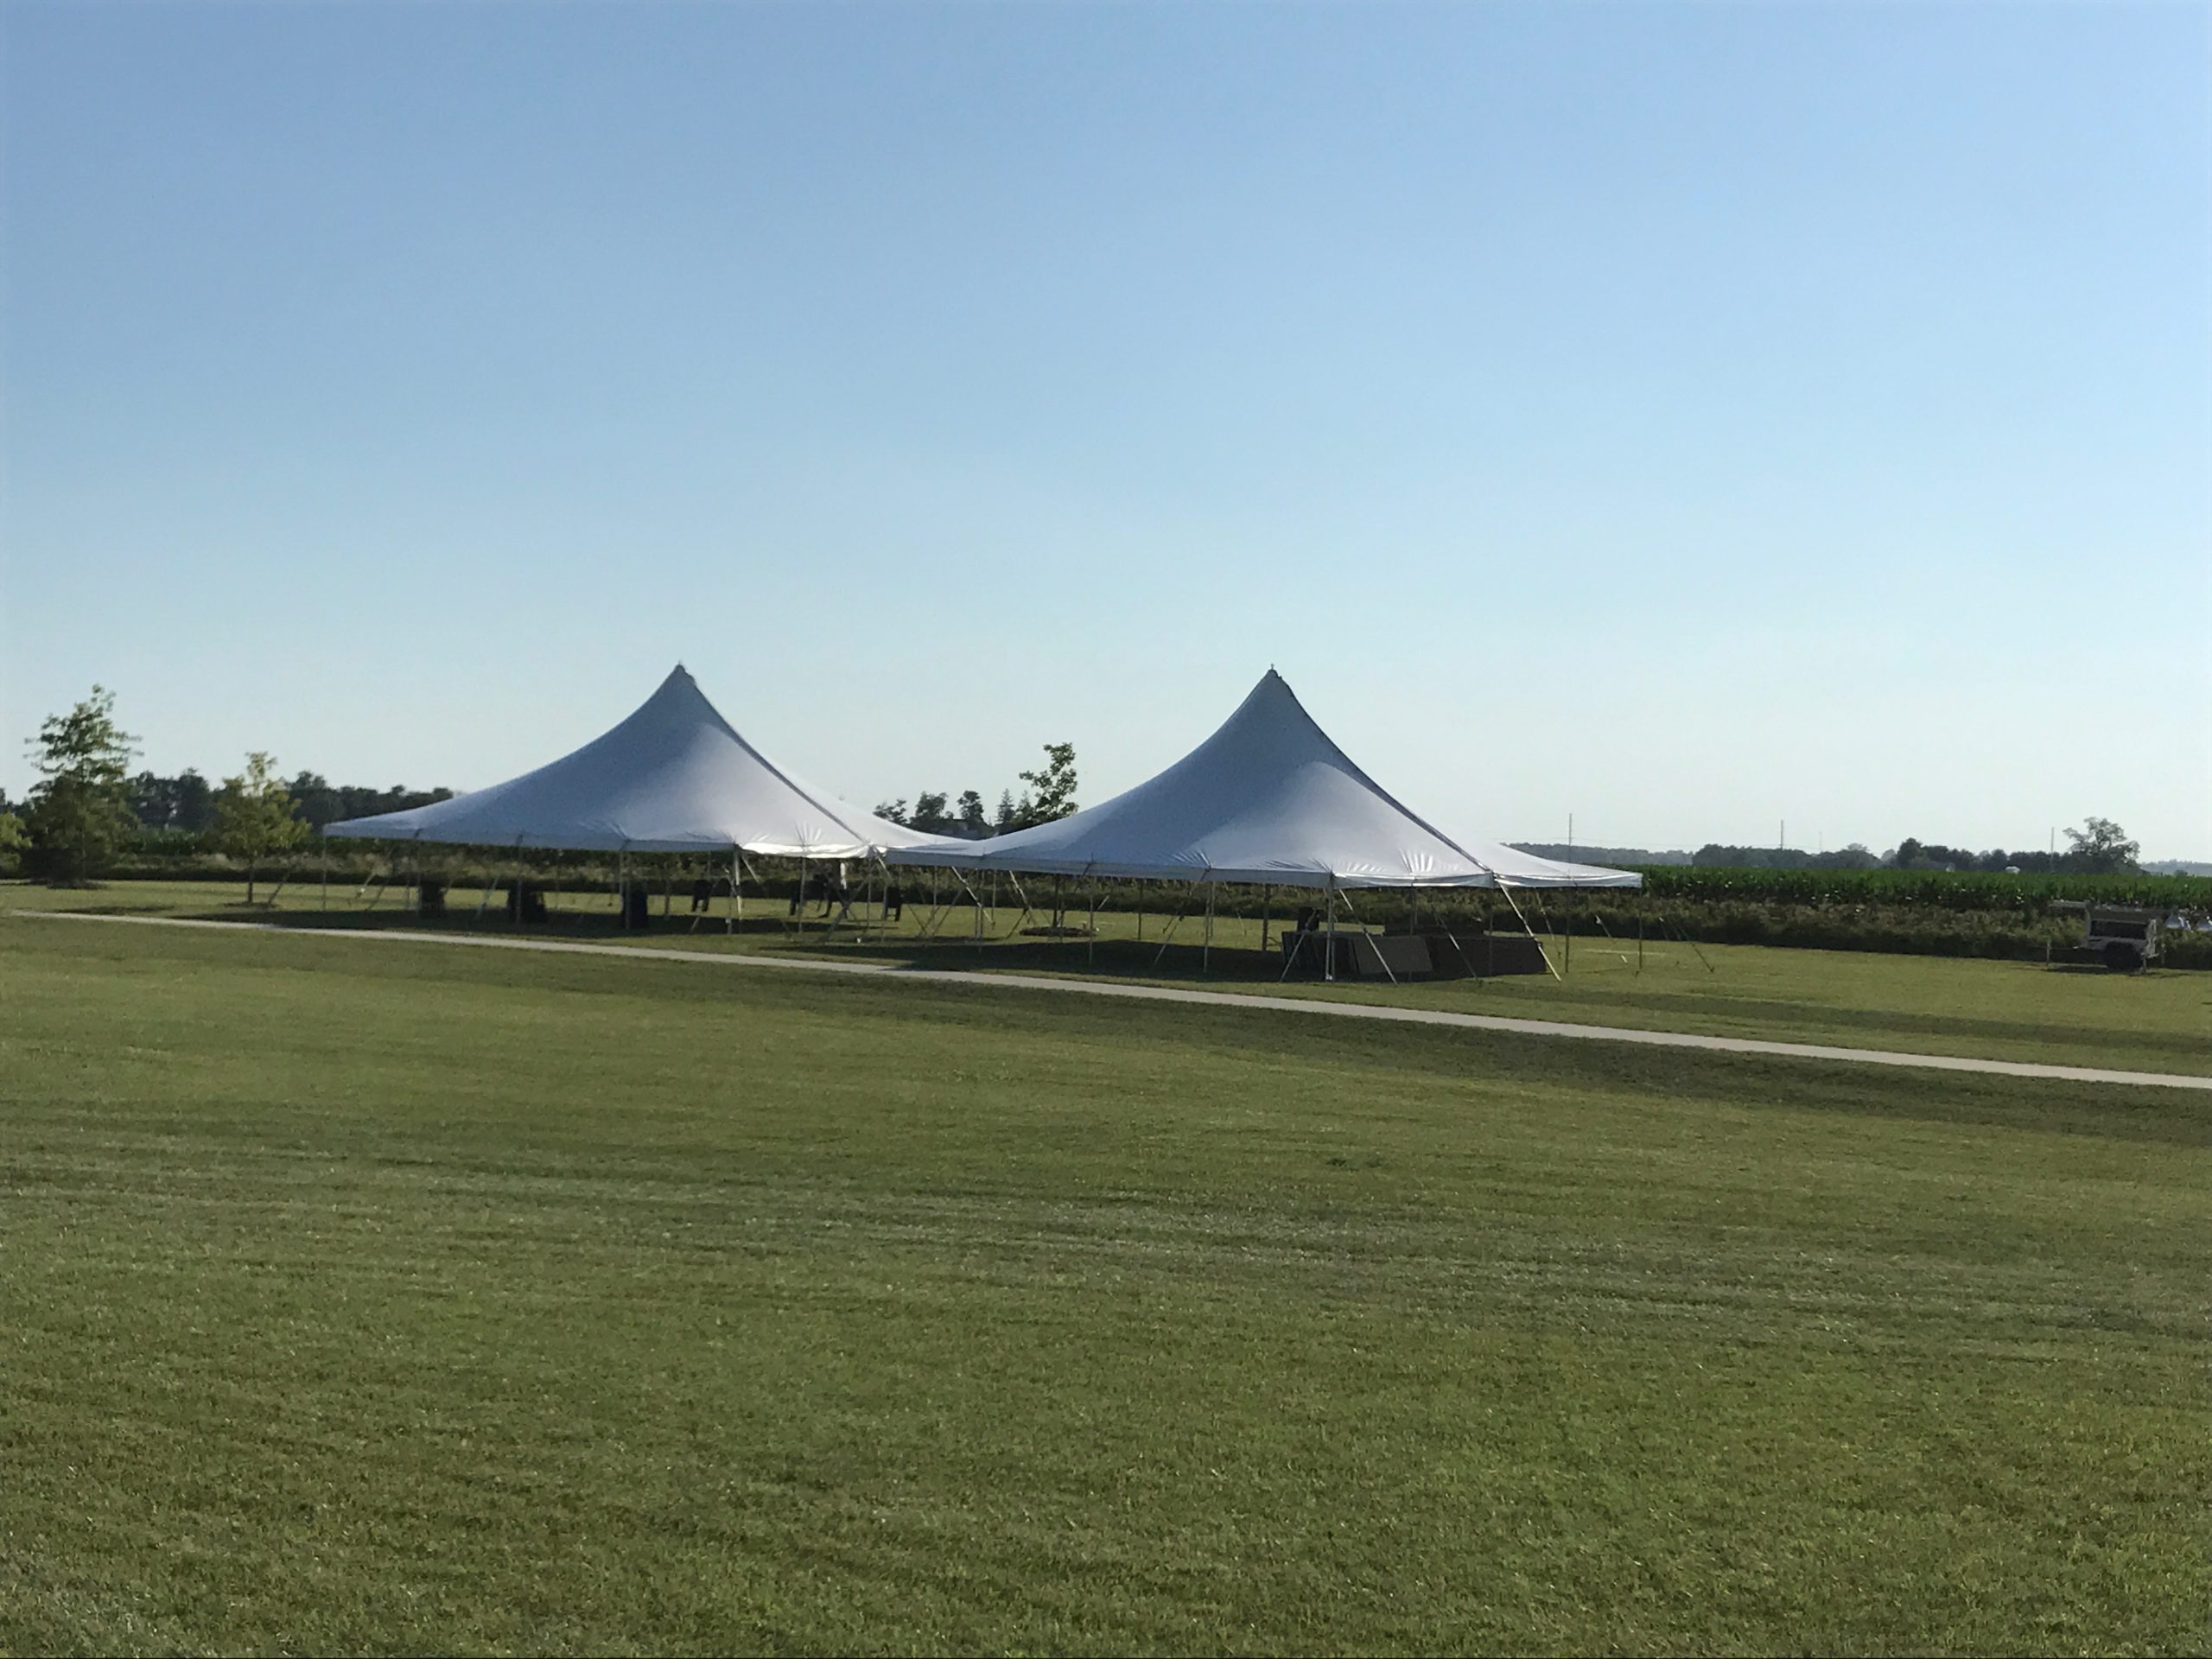 Two 40' x 40' rope and pole tent at the North Liberty Blues & BBQ festival